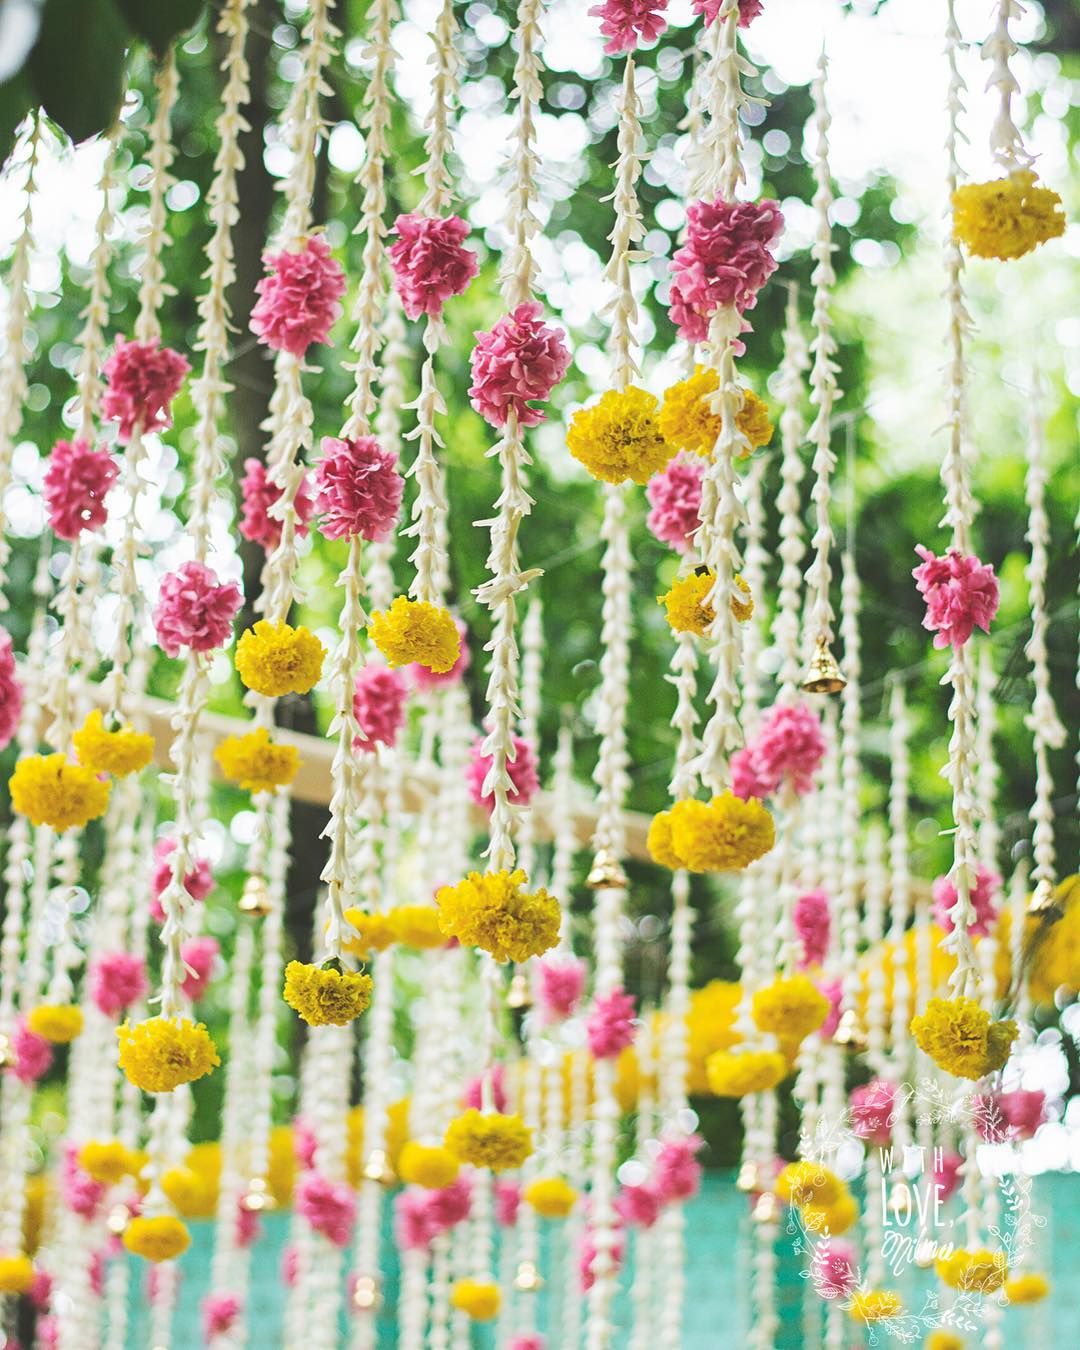 Mogra galore with hints of pink & yellow!